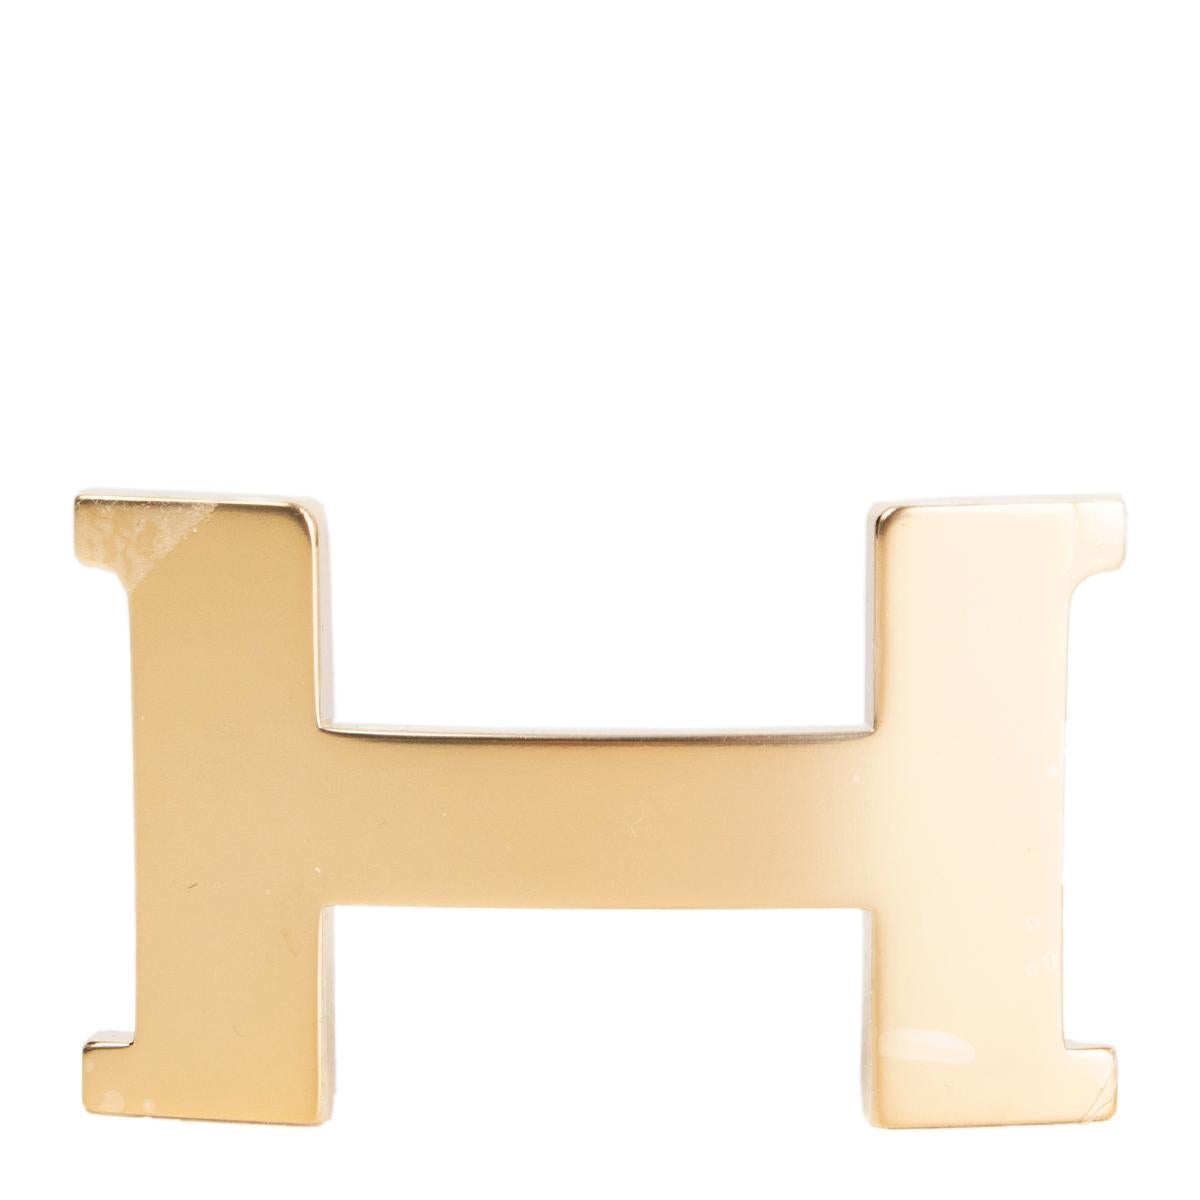 Sold at Auction: A genuine VERSACE gold plated tie holder. Length